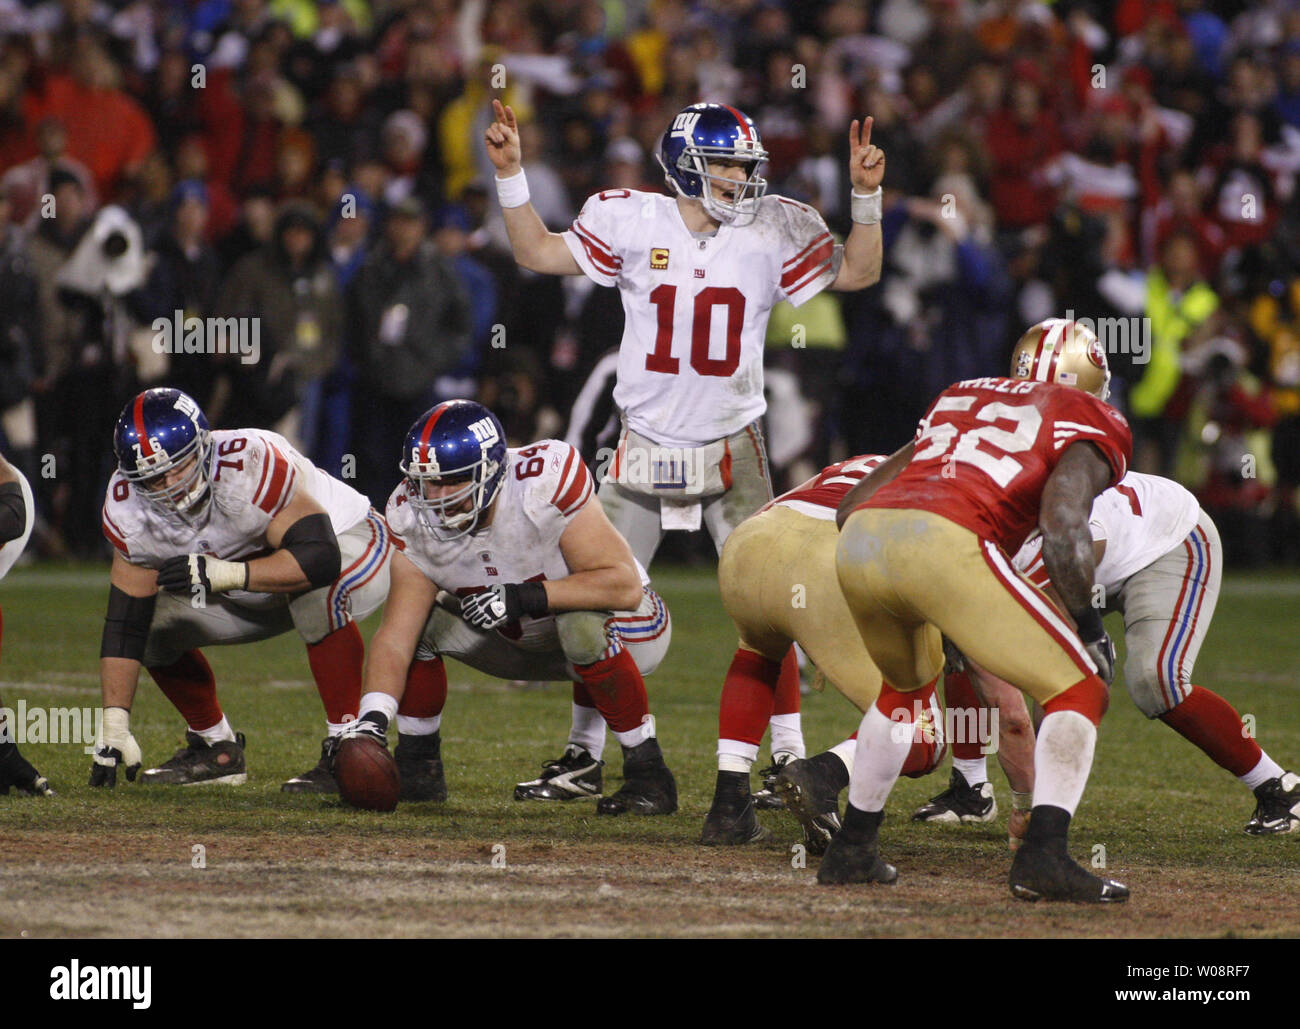 New York Giants QB Eli Manning changes the call at the line against the San Francisco 49ers in the NFC Championship at Candlestick Park in San Francisco on January 22, 2012. The Giants won 20-17.    UPI/Terry Schmitt Stock Photo